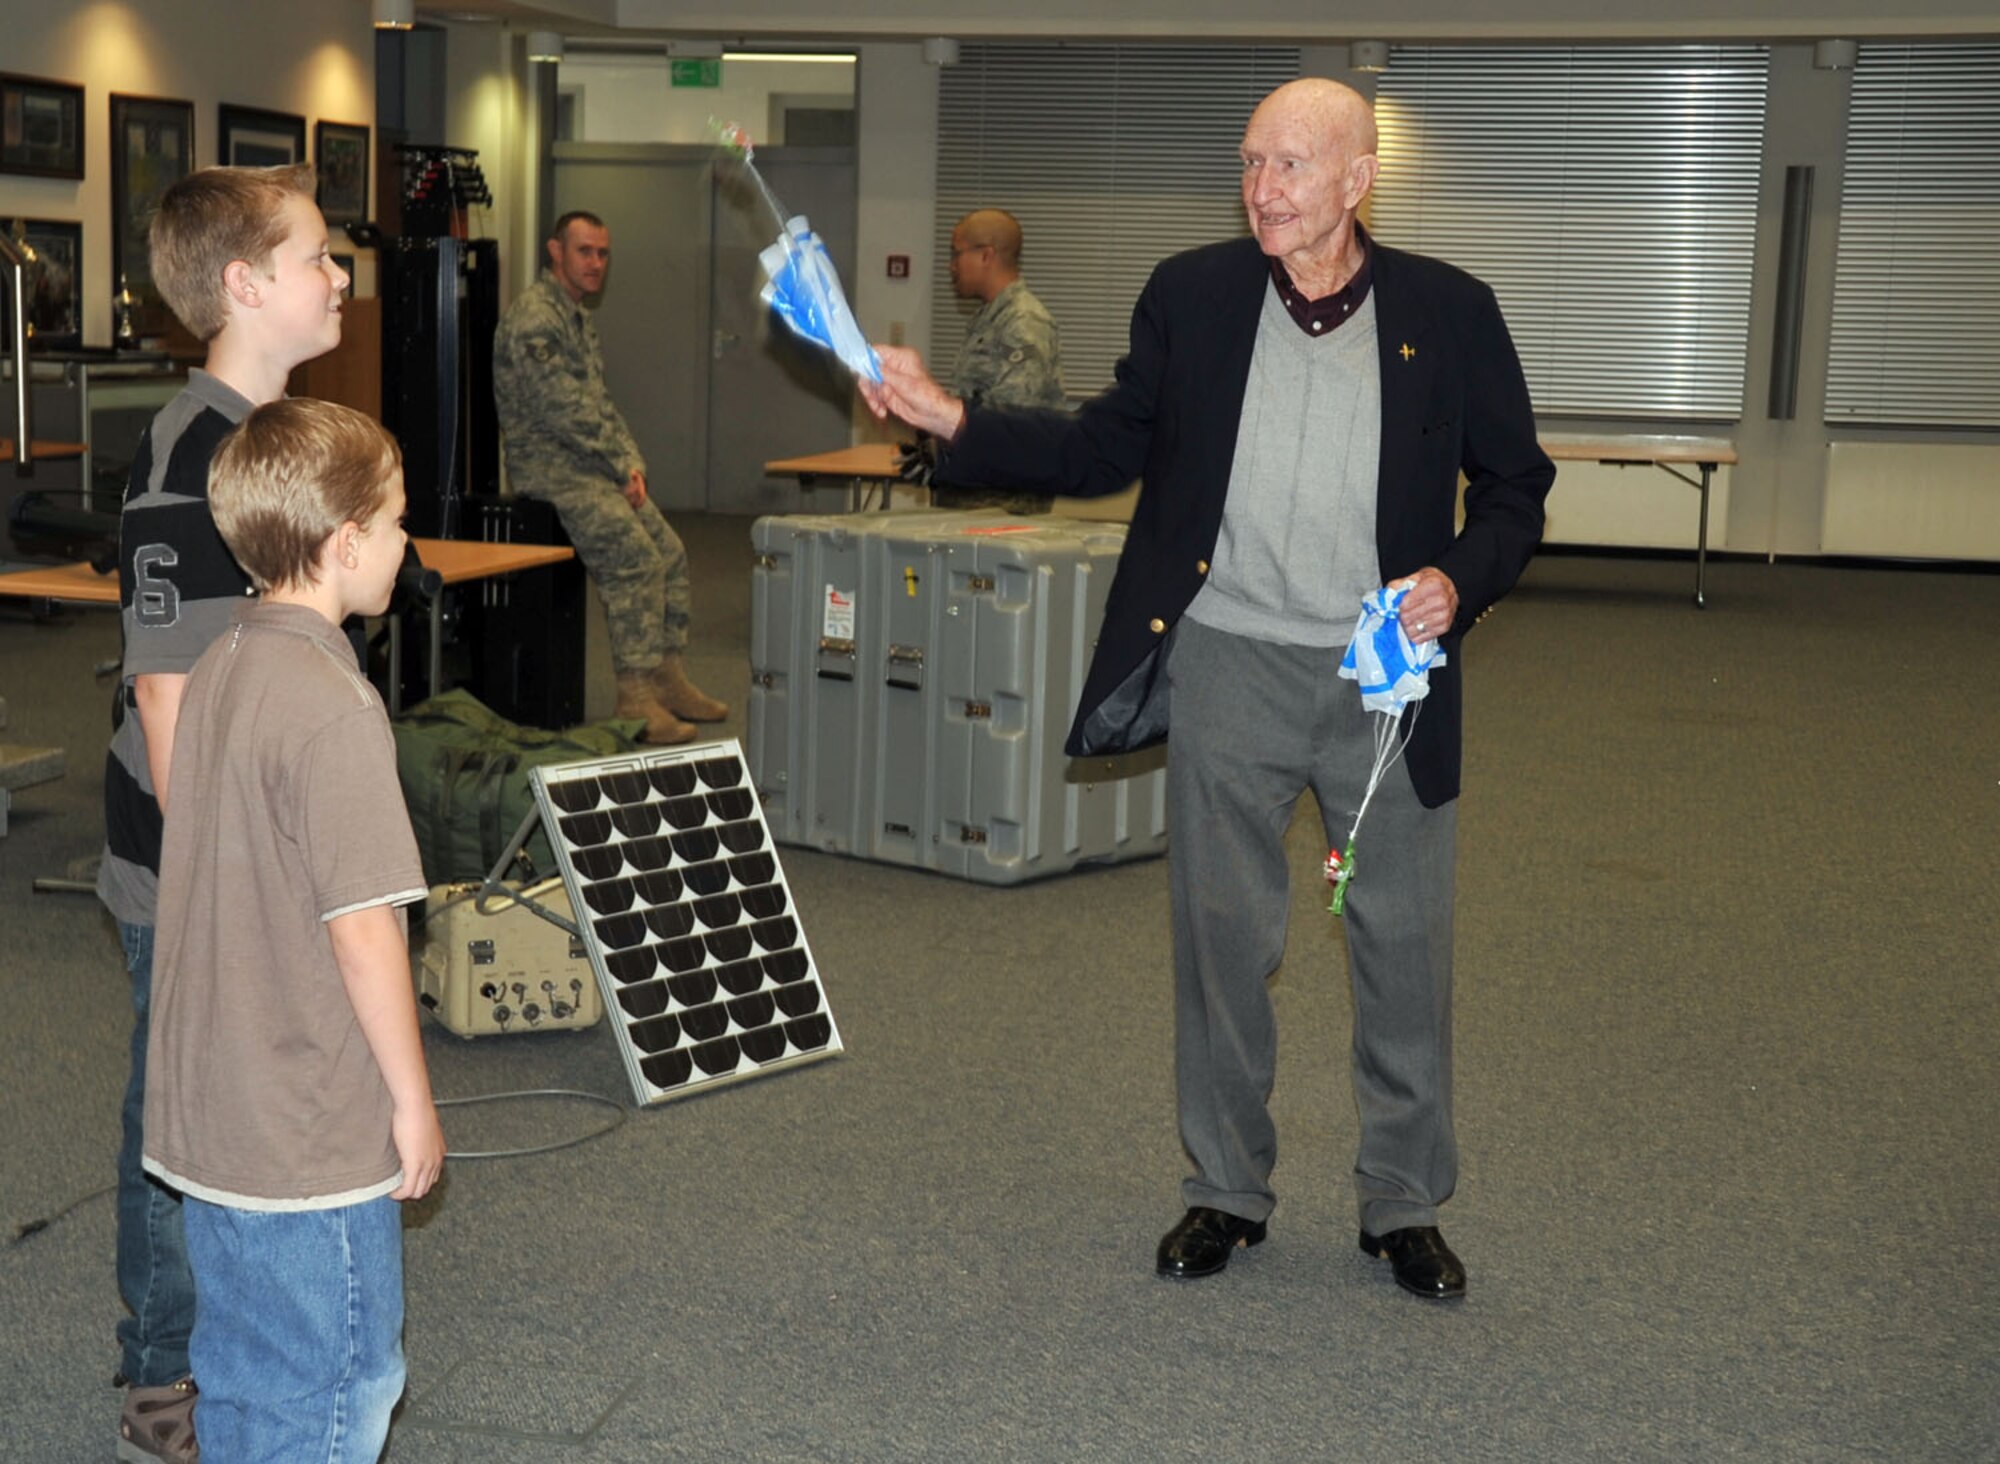 Col. Gail Halvorsen (Ret.) helps two children test their parachutes with toy soldiers holding candy bars.  The soldiers were part of decorations created by the 435th Contingency Response Group at Ramstein Air Base, Germany.  After briefing him on their mission, the group surprised the WWII veteran with a cake celebrating his 90th birthday.  The Berlin Airlift veteran is known for his role in strengthening U.S.-German ties after a goodwill gesture of air dropping candy bars to children in East Berlin turned into a full-scale operation that ended in more than 20 tons of candy delivered via small parachutes.  He is touring Europe and Southwest Asia this week to visit and encourage service members. (U.S. Air Force photo/1st Lt. Kathleen Ferrero)